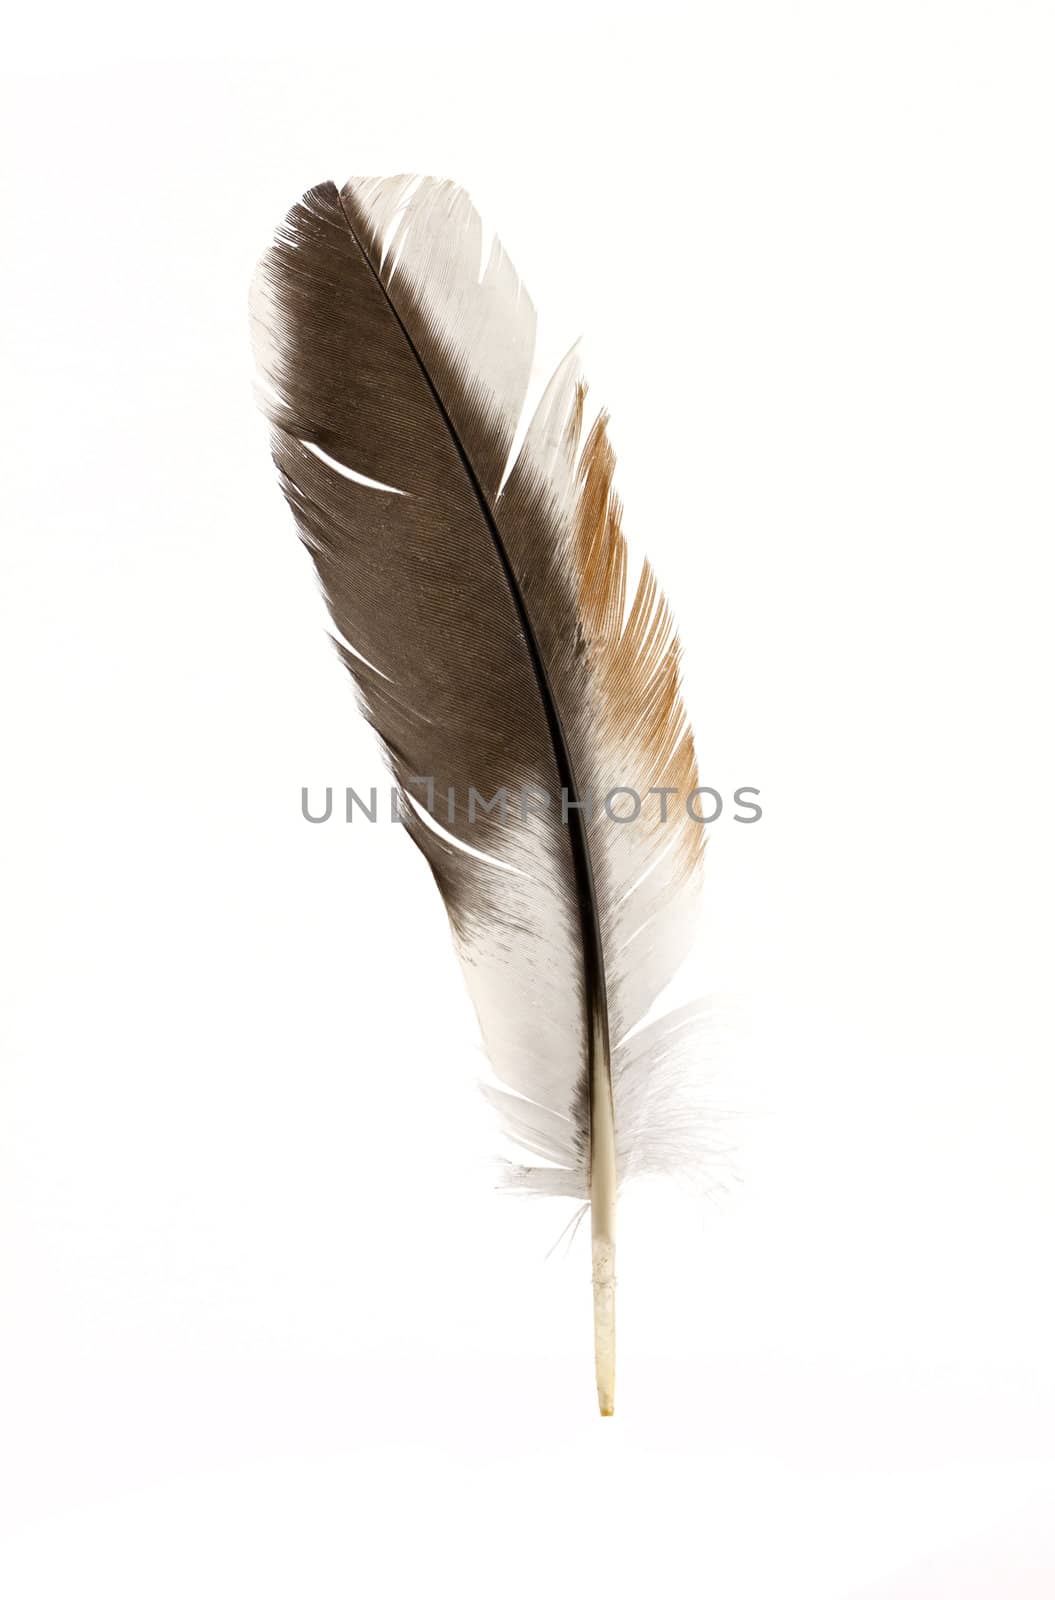 Black feather isolated on a white background